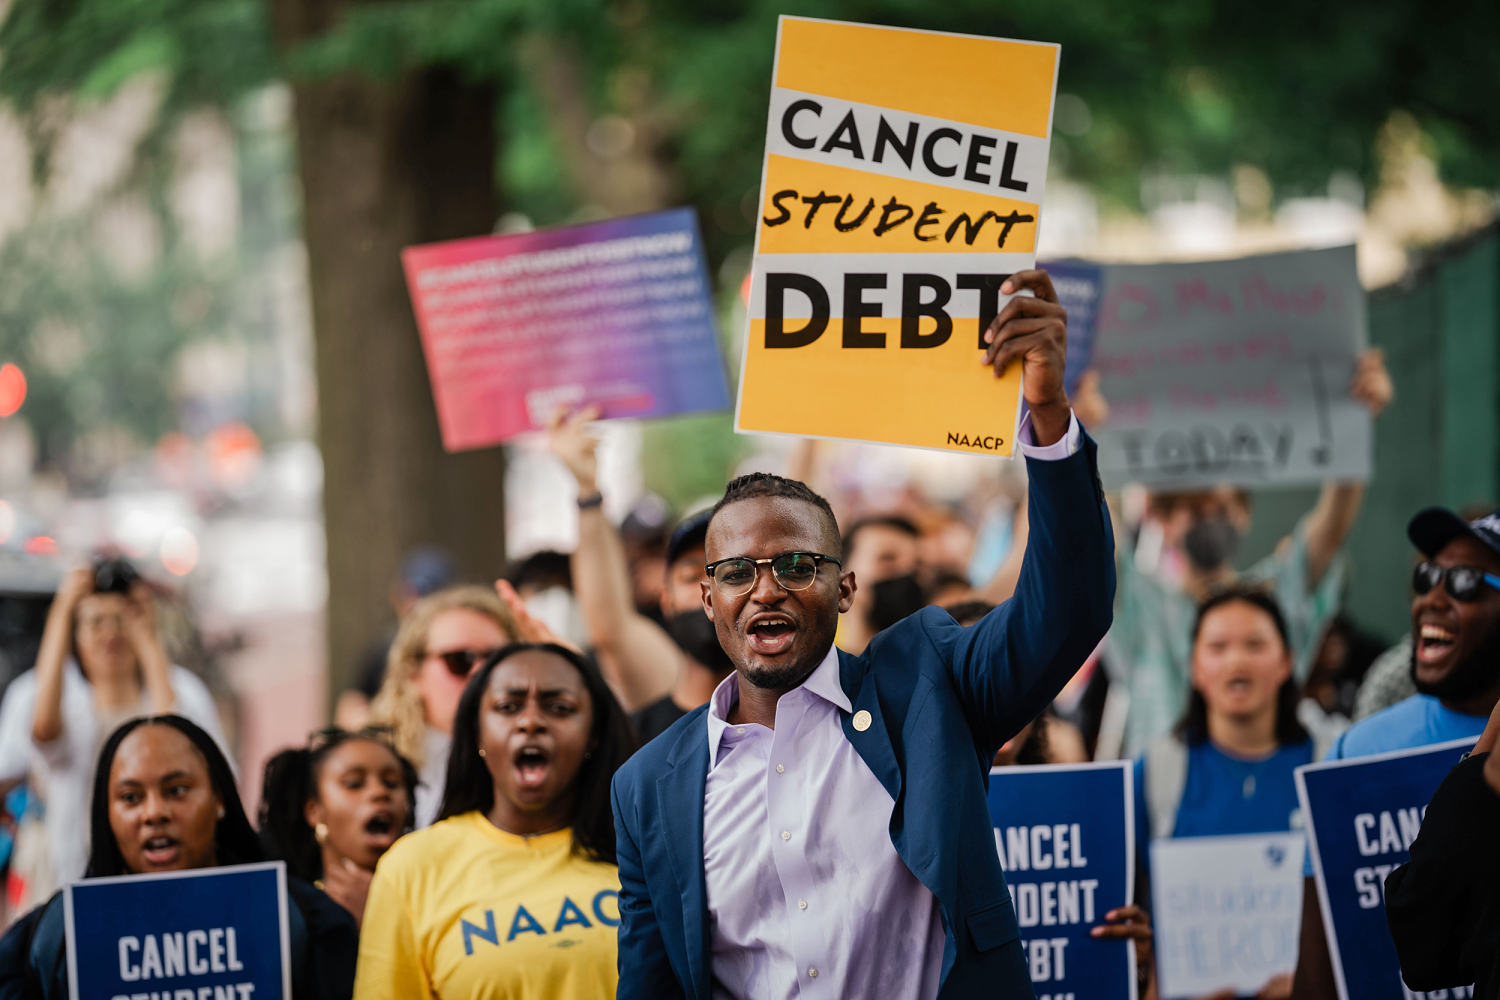 biden has forgiven billions in student loans but his allies say voters aren't giving him enough credit